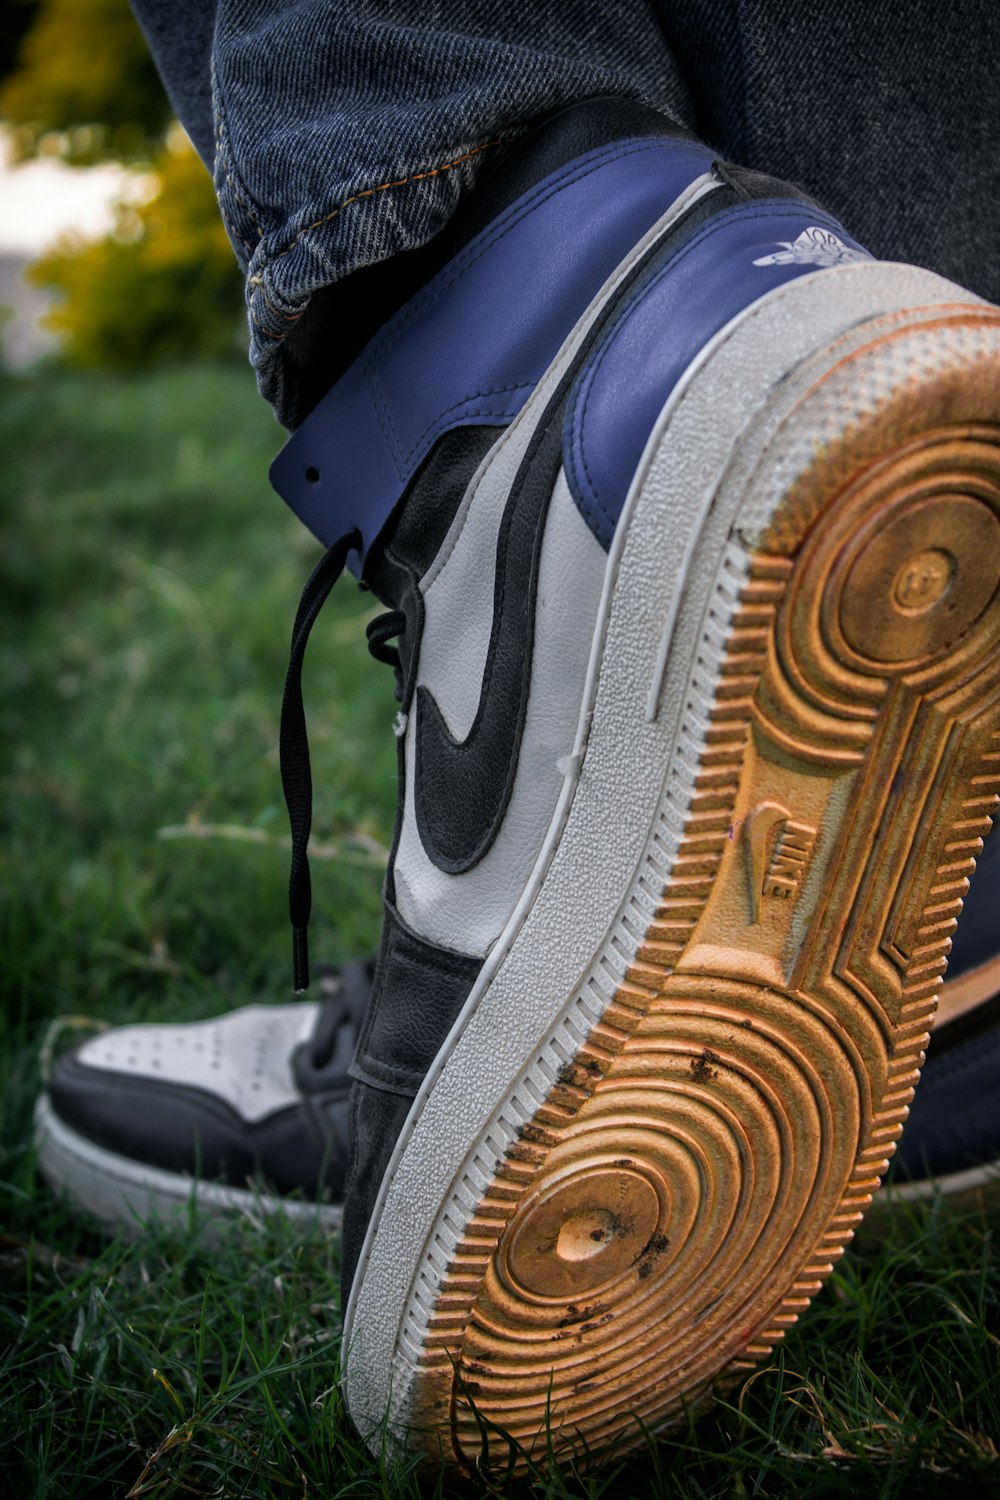 a close up of a person's shoe on the grass